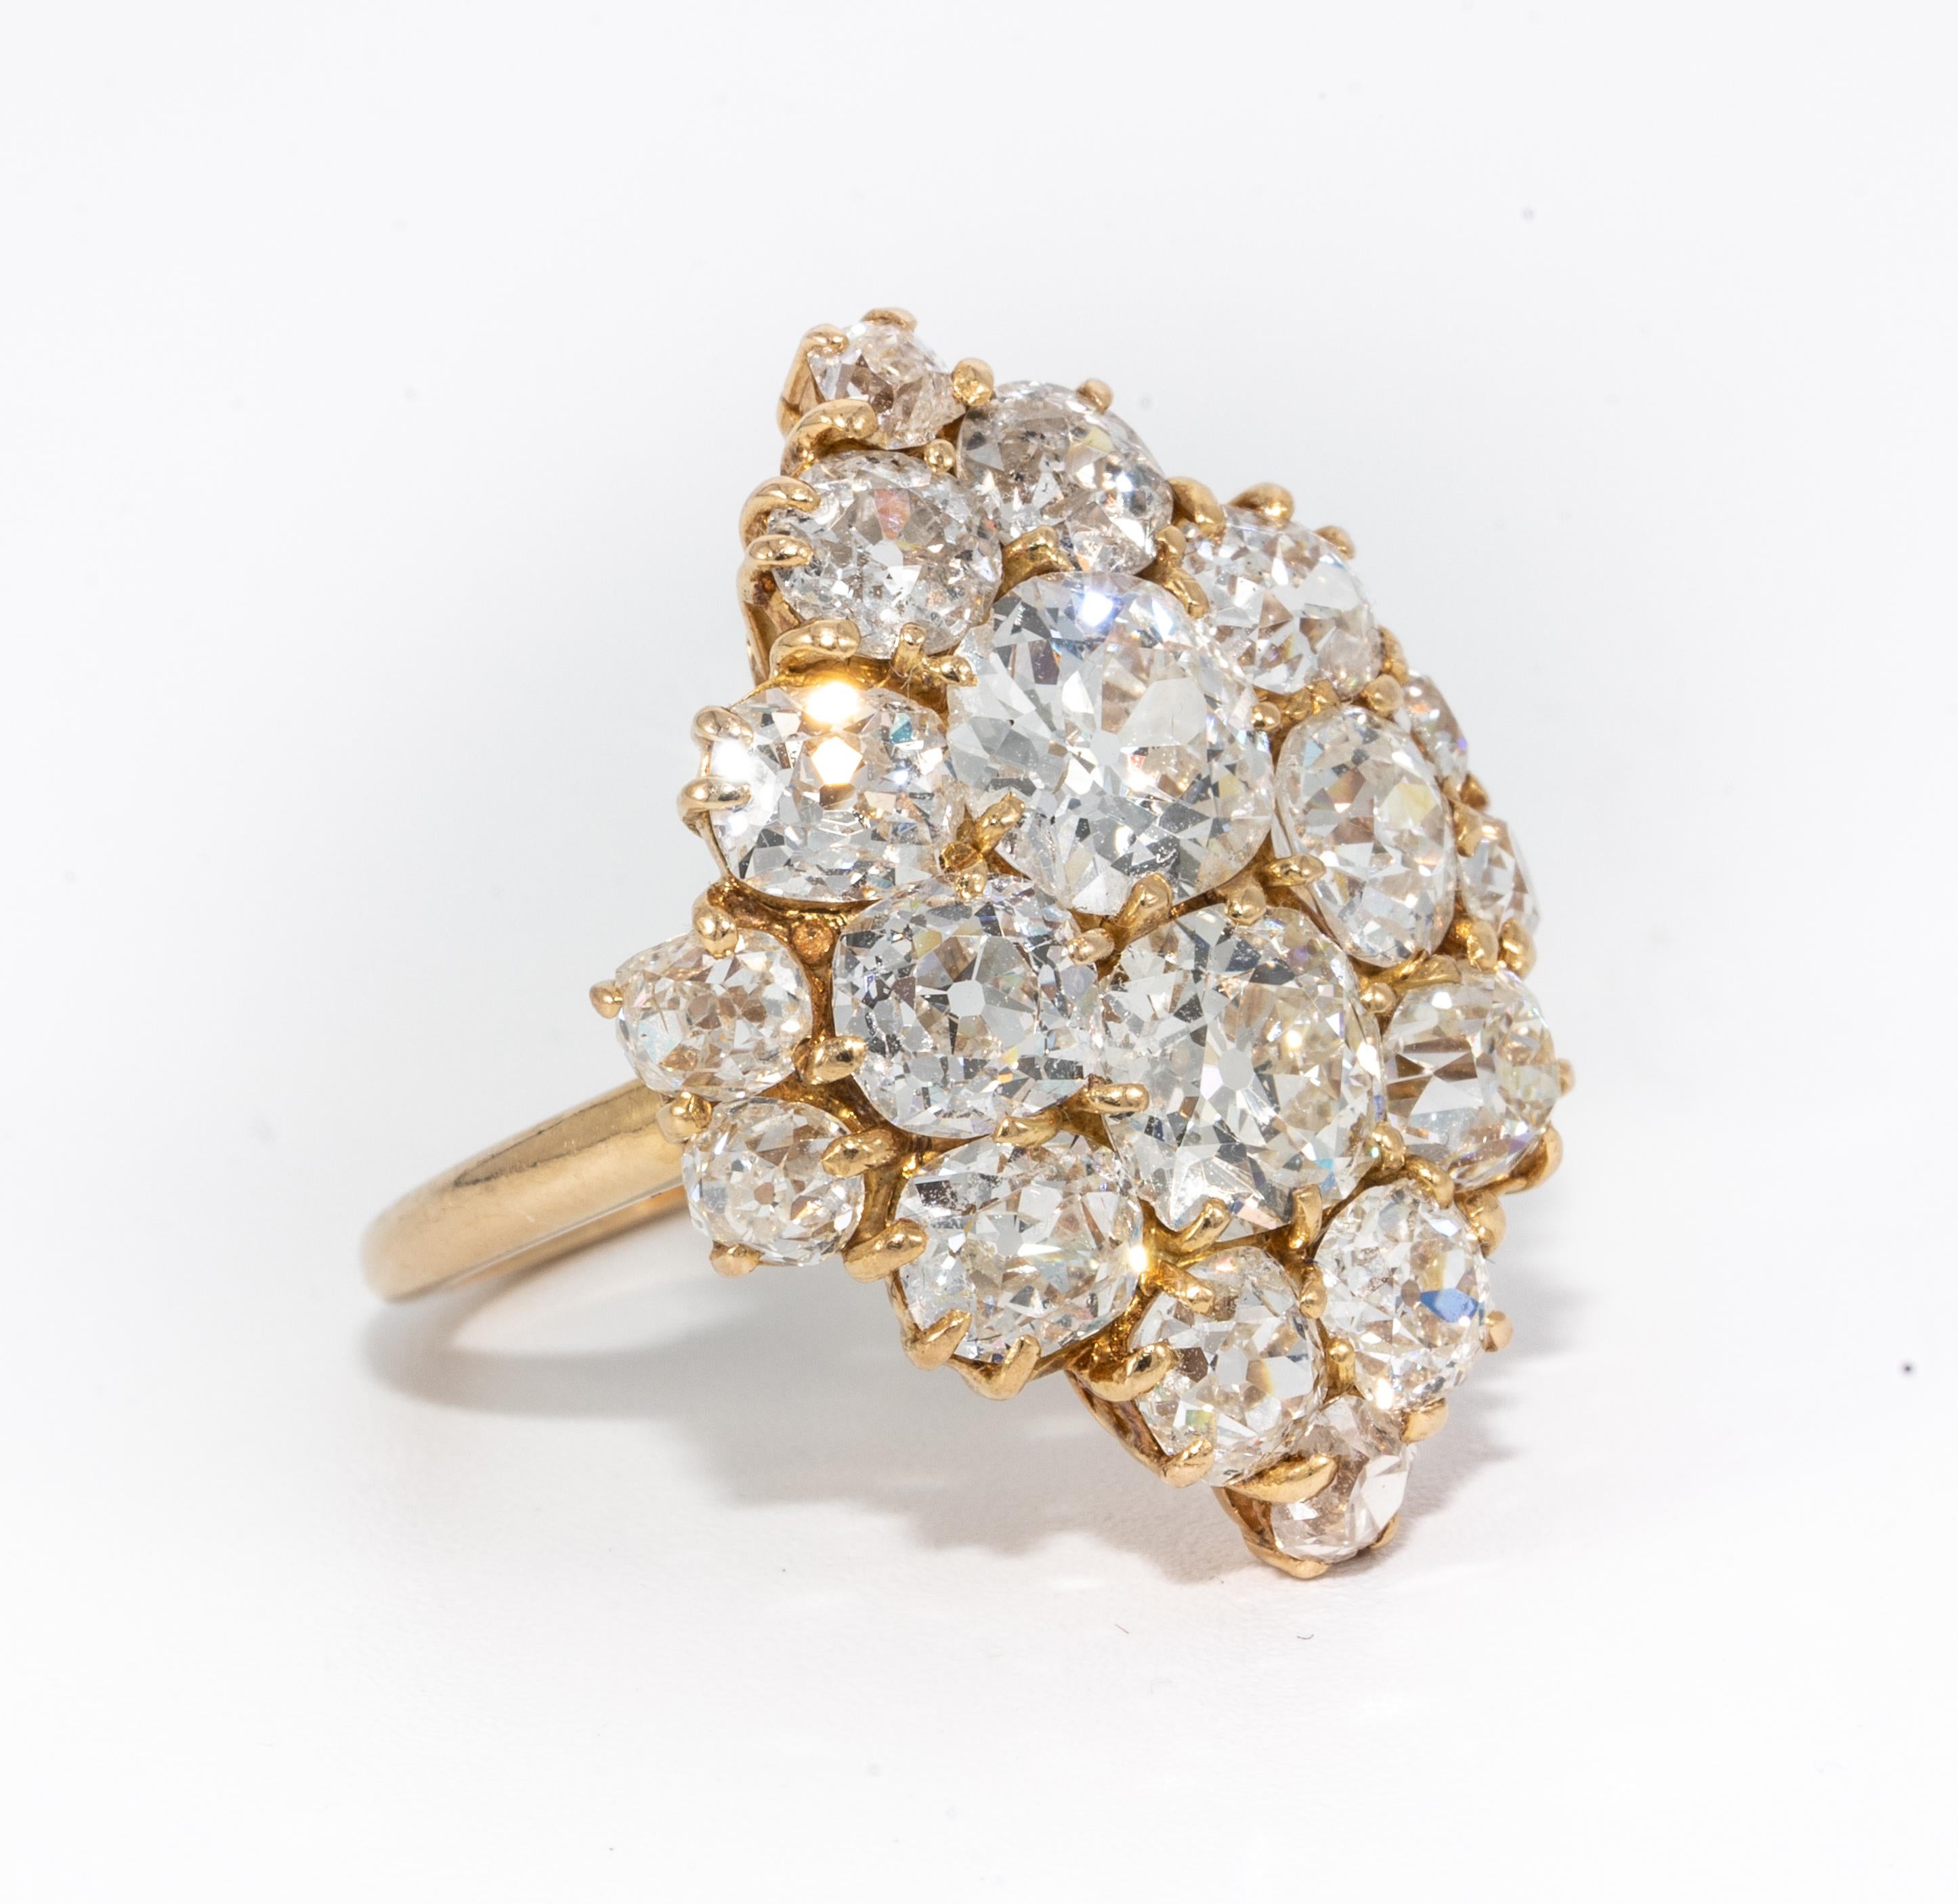 Antique Victorian Diamond Cluster Ring with Old Mine Cuts 
18 Old Mine Diamonds weigh Approx 6.48 Carats
Breakdown is as follows:: 2 larger diamonds weigh approx  1.04ct, and 1.00 ct, 2 diamonds @ .65ct each , 2 diamonds @ .50ct each, 4 diamonds @